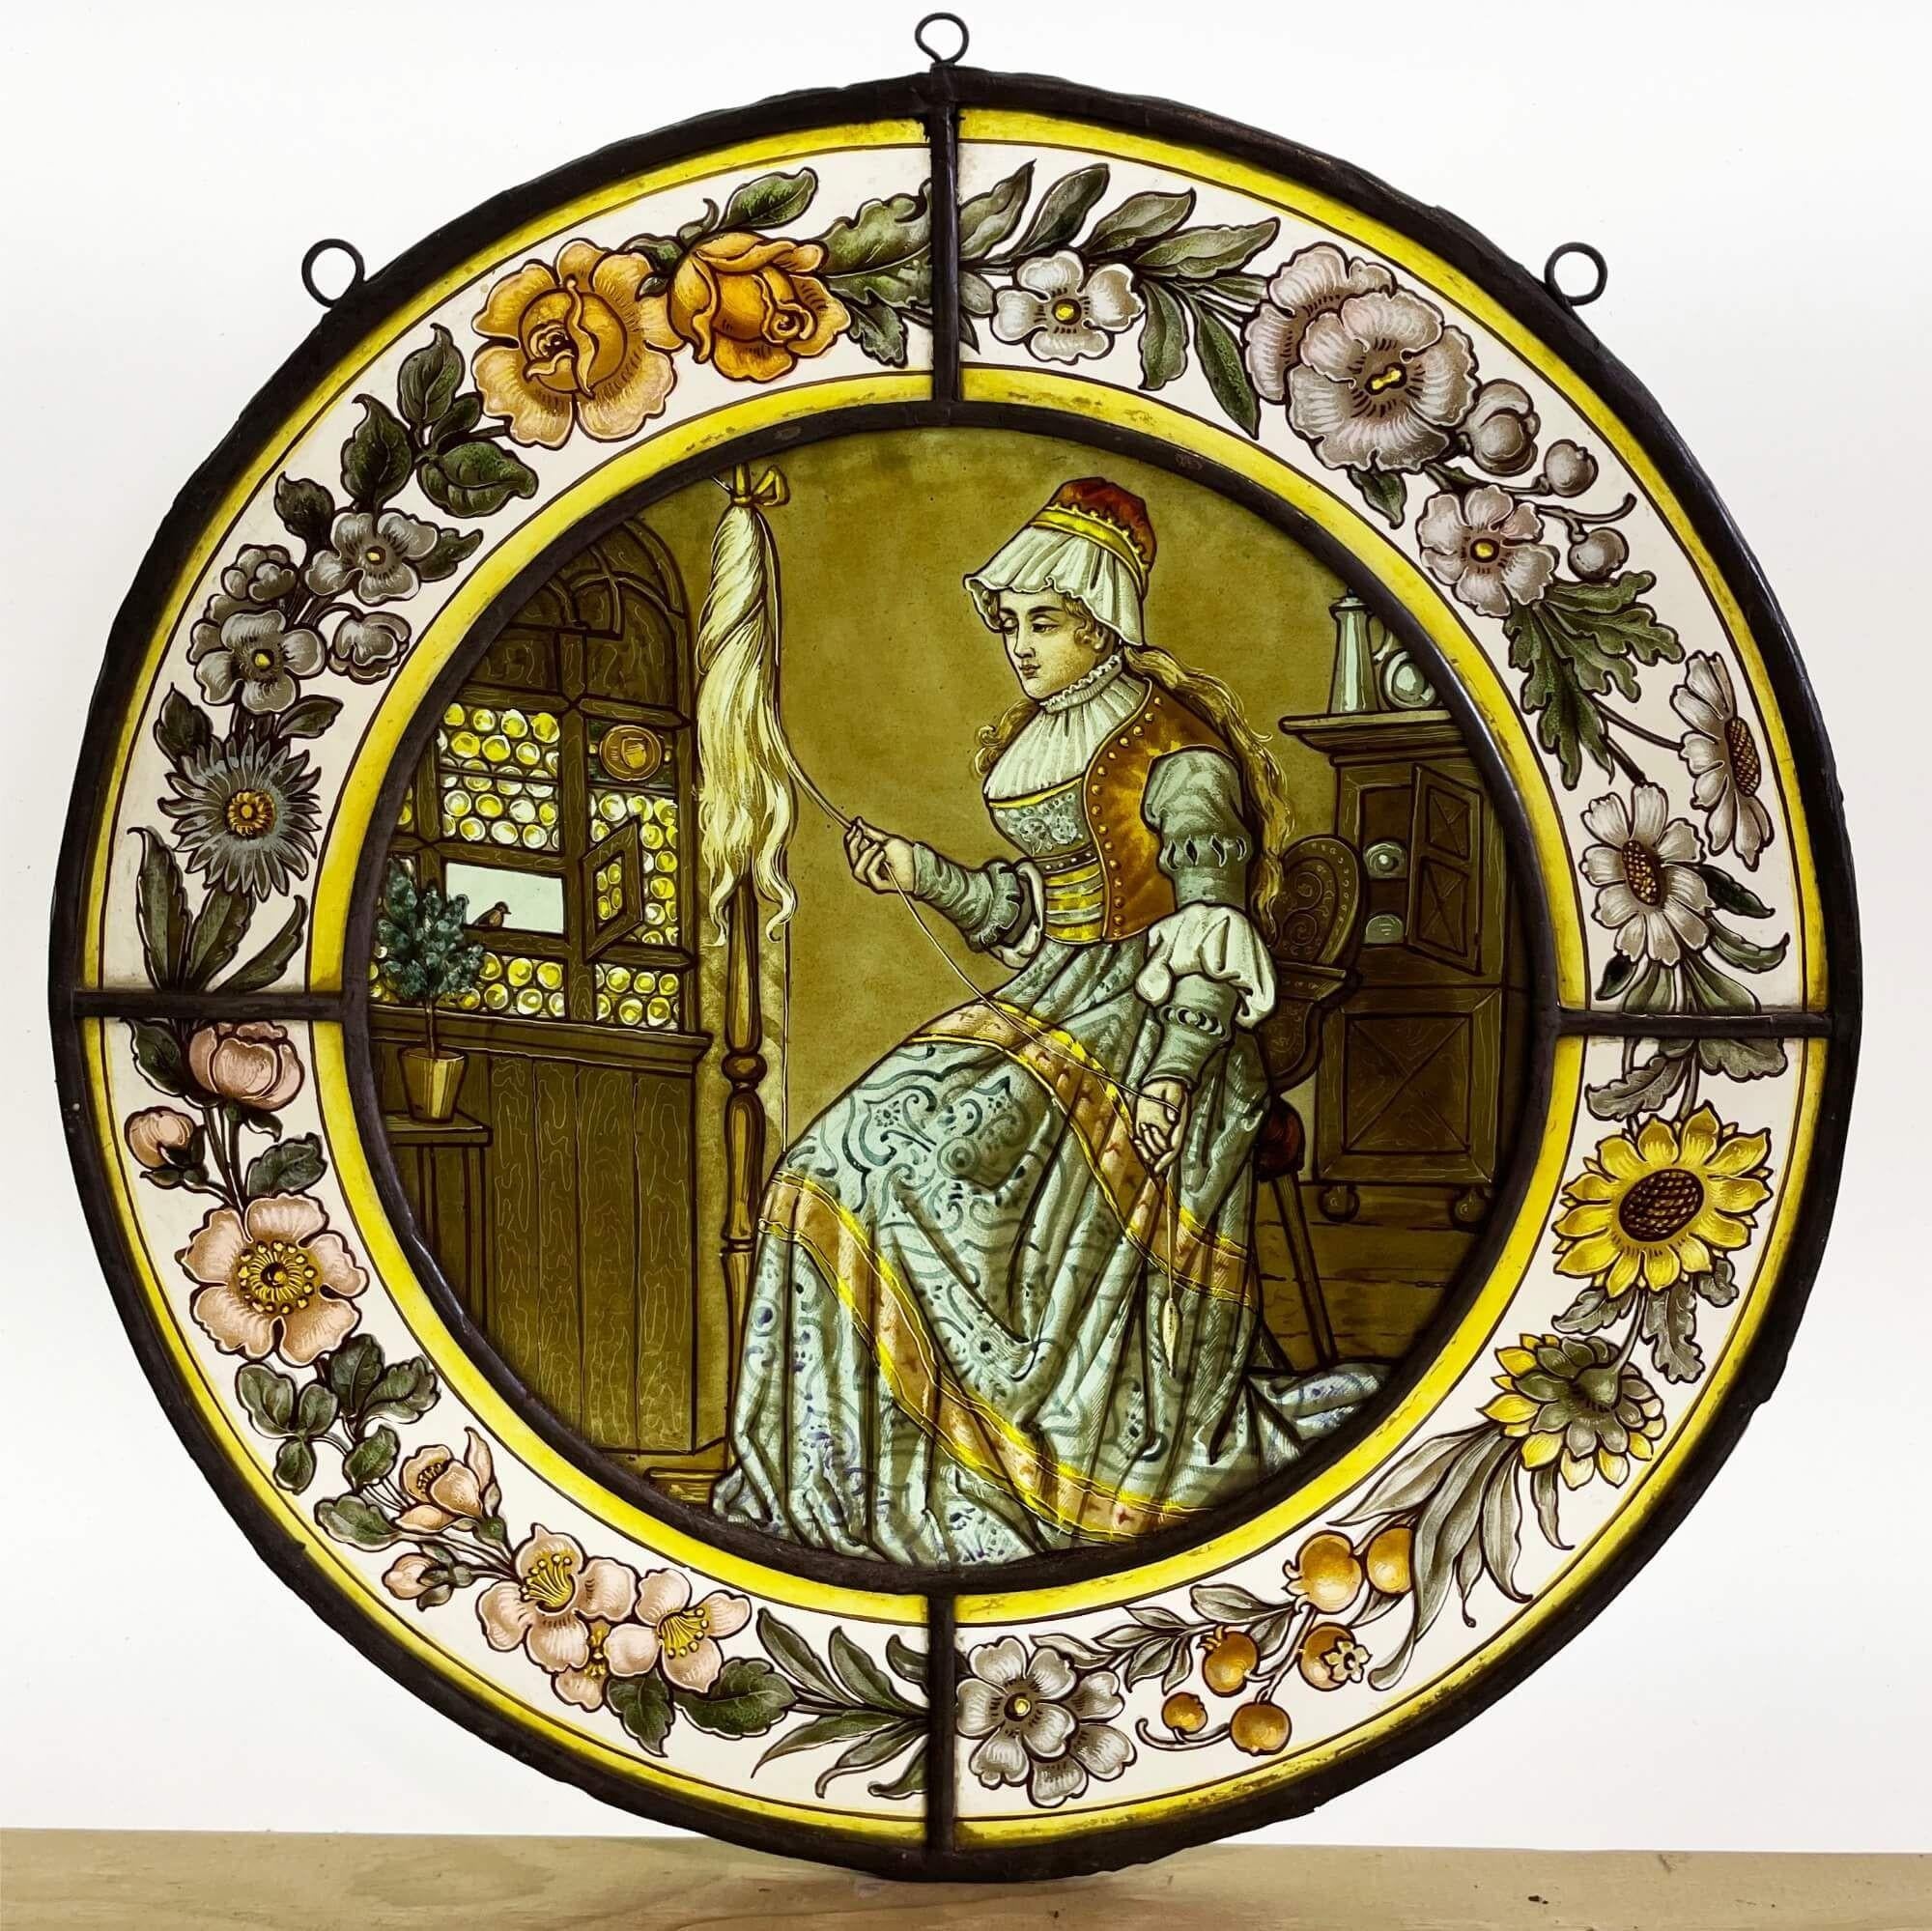 An antique stained glass window depicting a Victorian woman spinning yarn. Hand-painted stylised flowers and a vibrant yellow border surround the woman while she effortlessly spins the yarn. Her dress is a pale blue and gold displaying wealth and